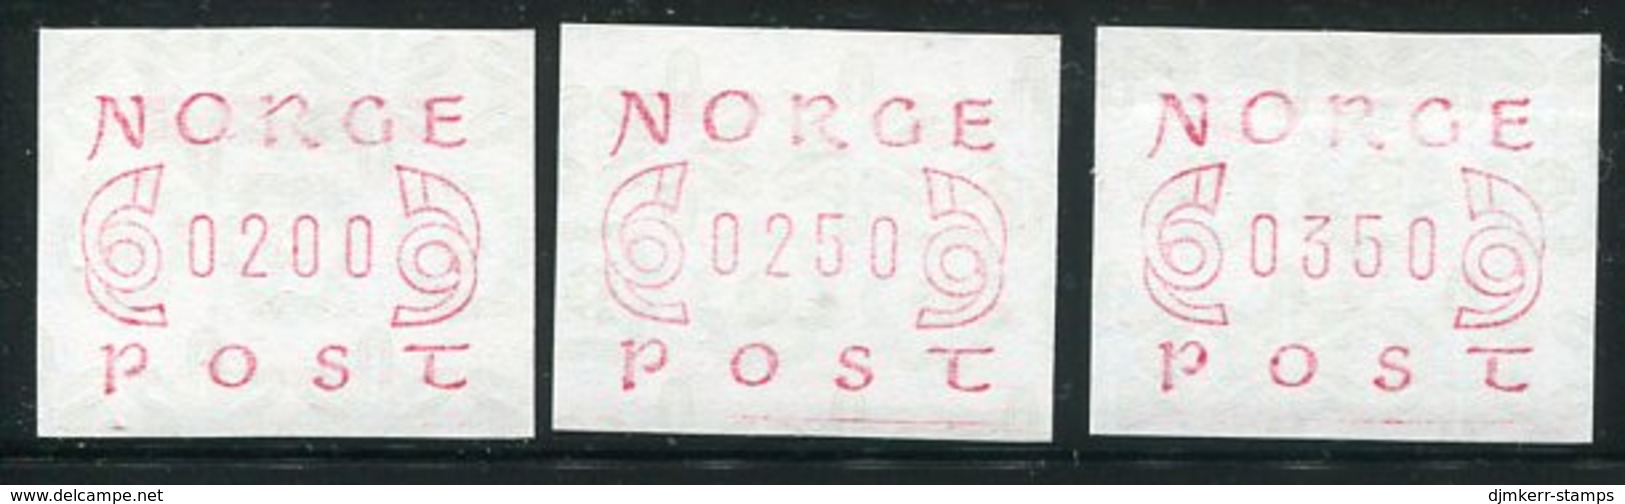 NORWAY 1980 Posthorns And Numeral Without Frame, Three Values  MNH / **.  Michel 2 - Viñetas De Franqueo [ATM]